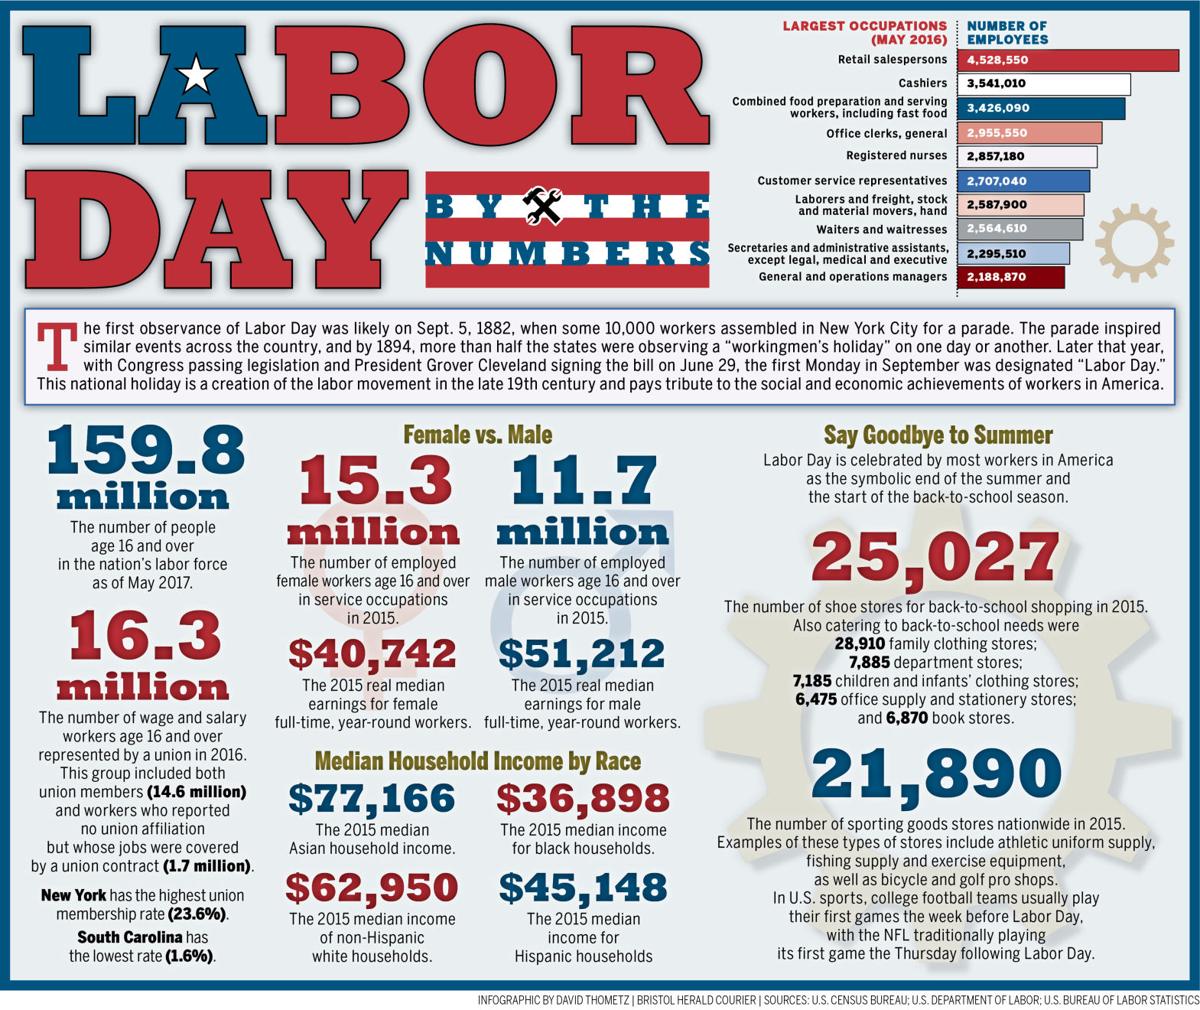 125th Anniversary of Labor Day: A look at Labor Day by the numbers ...